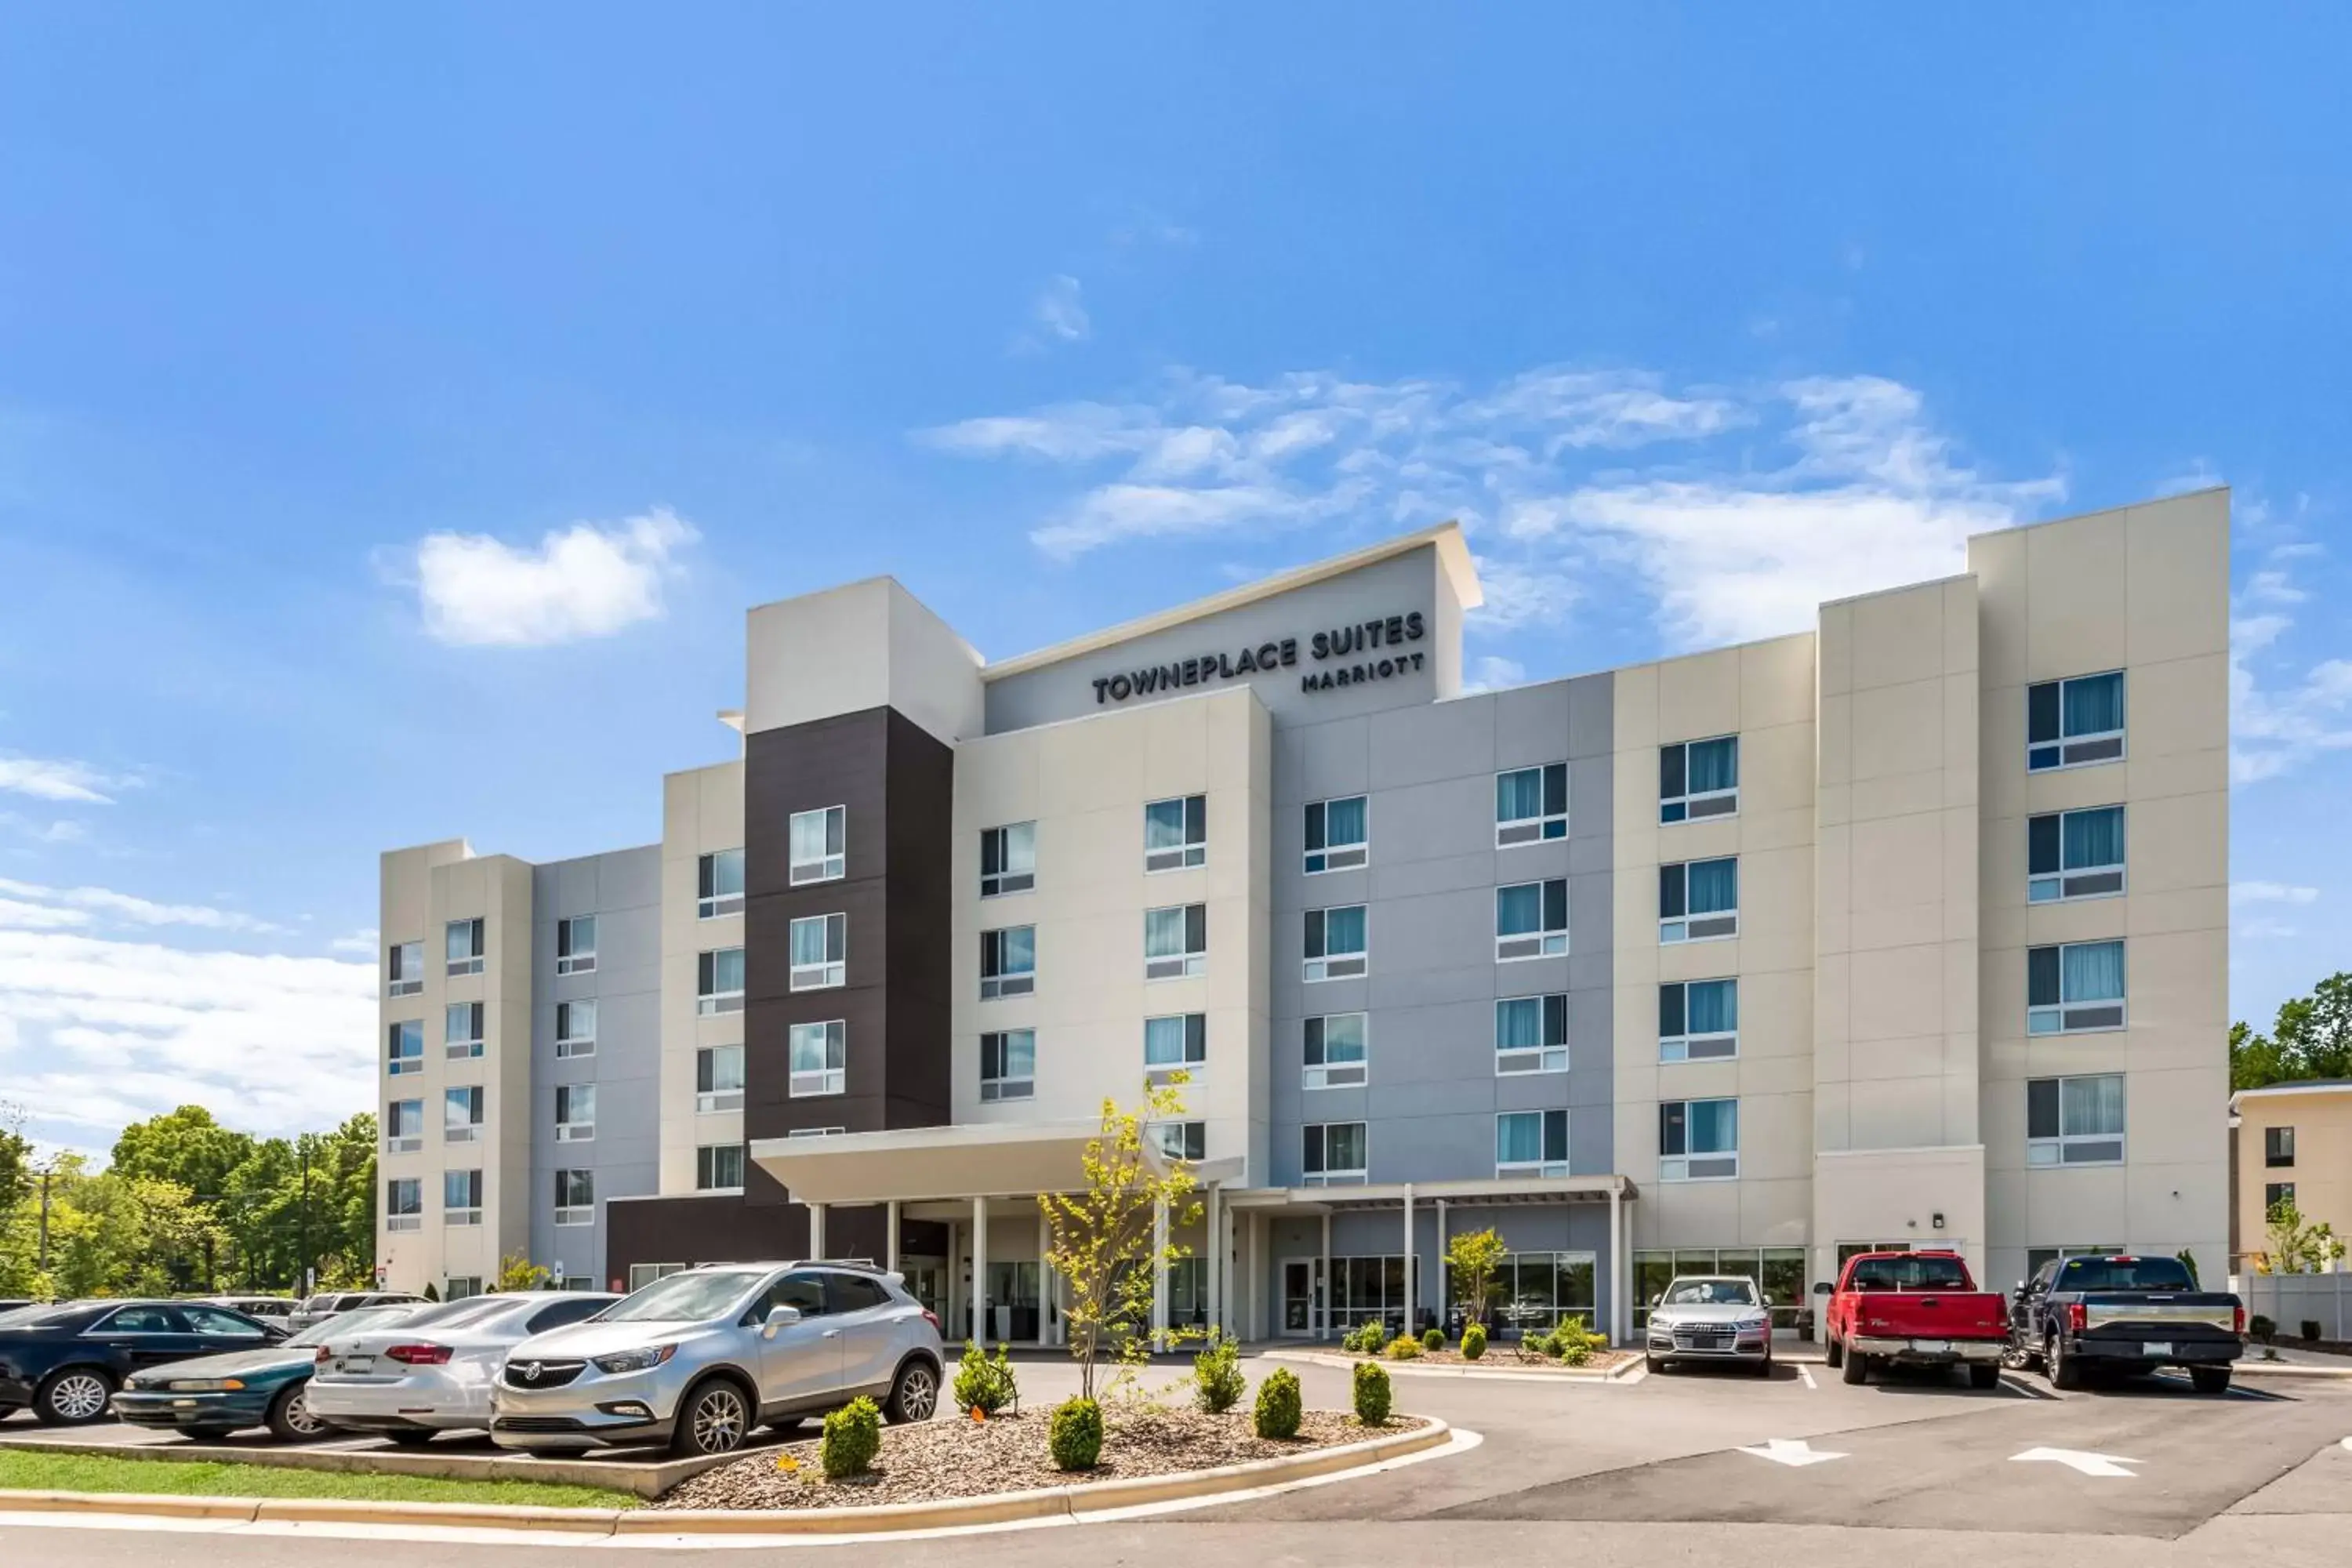 Property Building in TownePlace Suites by Marriott Greensboro Coliseum Area